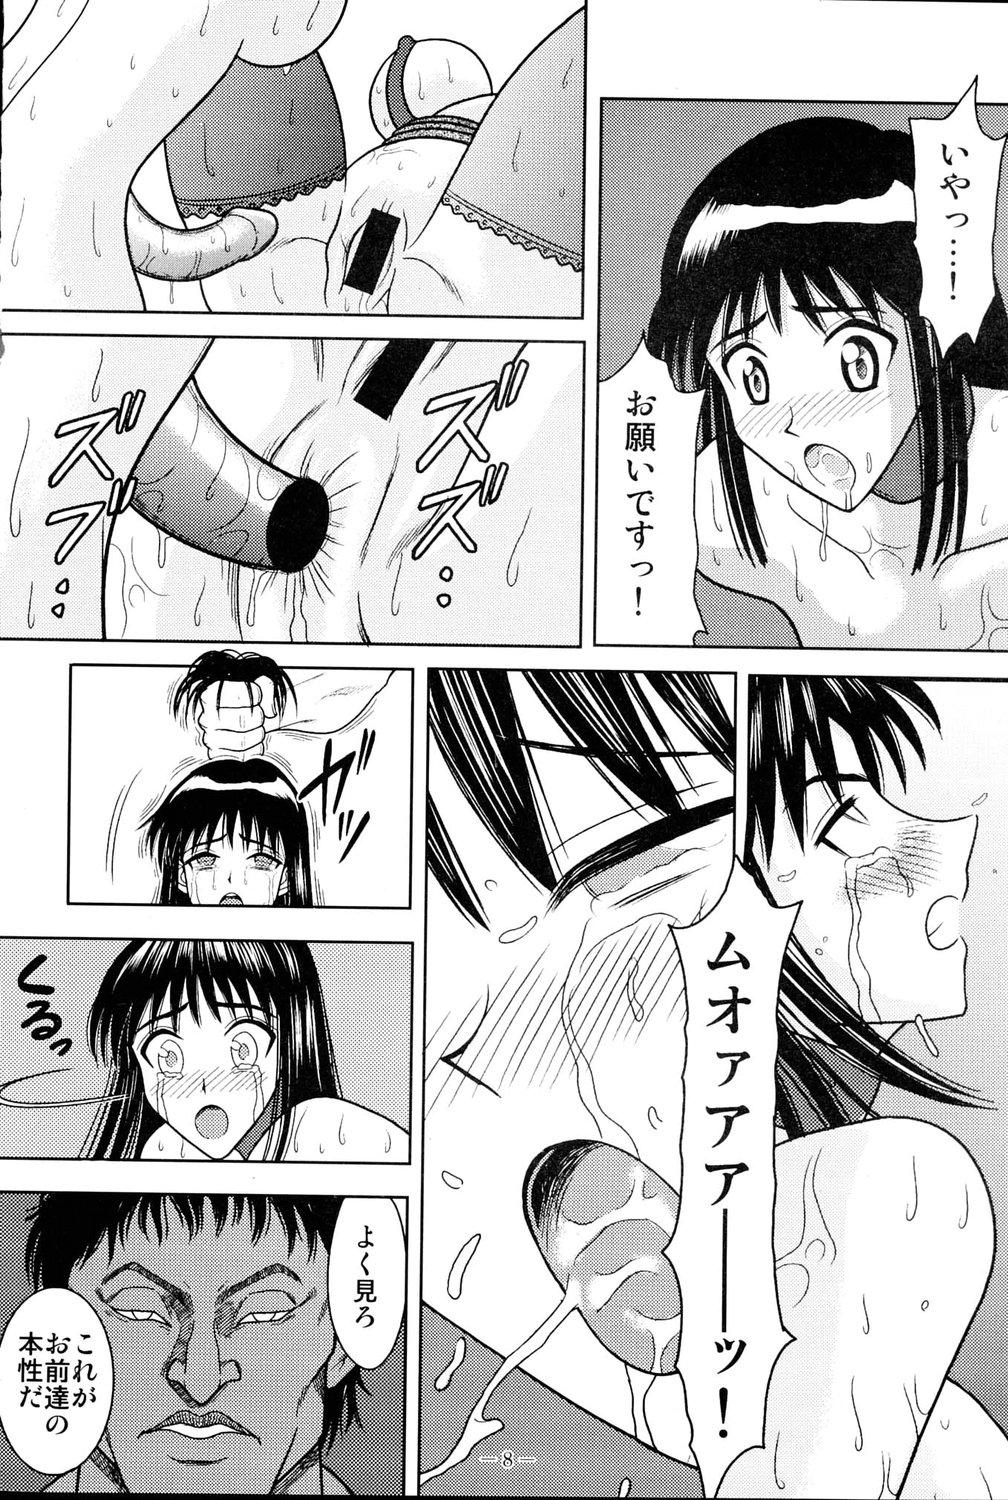 Mistress Slave Rumble 3 - School rumble Dicksucking - Page 7